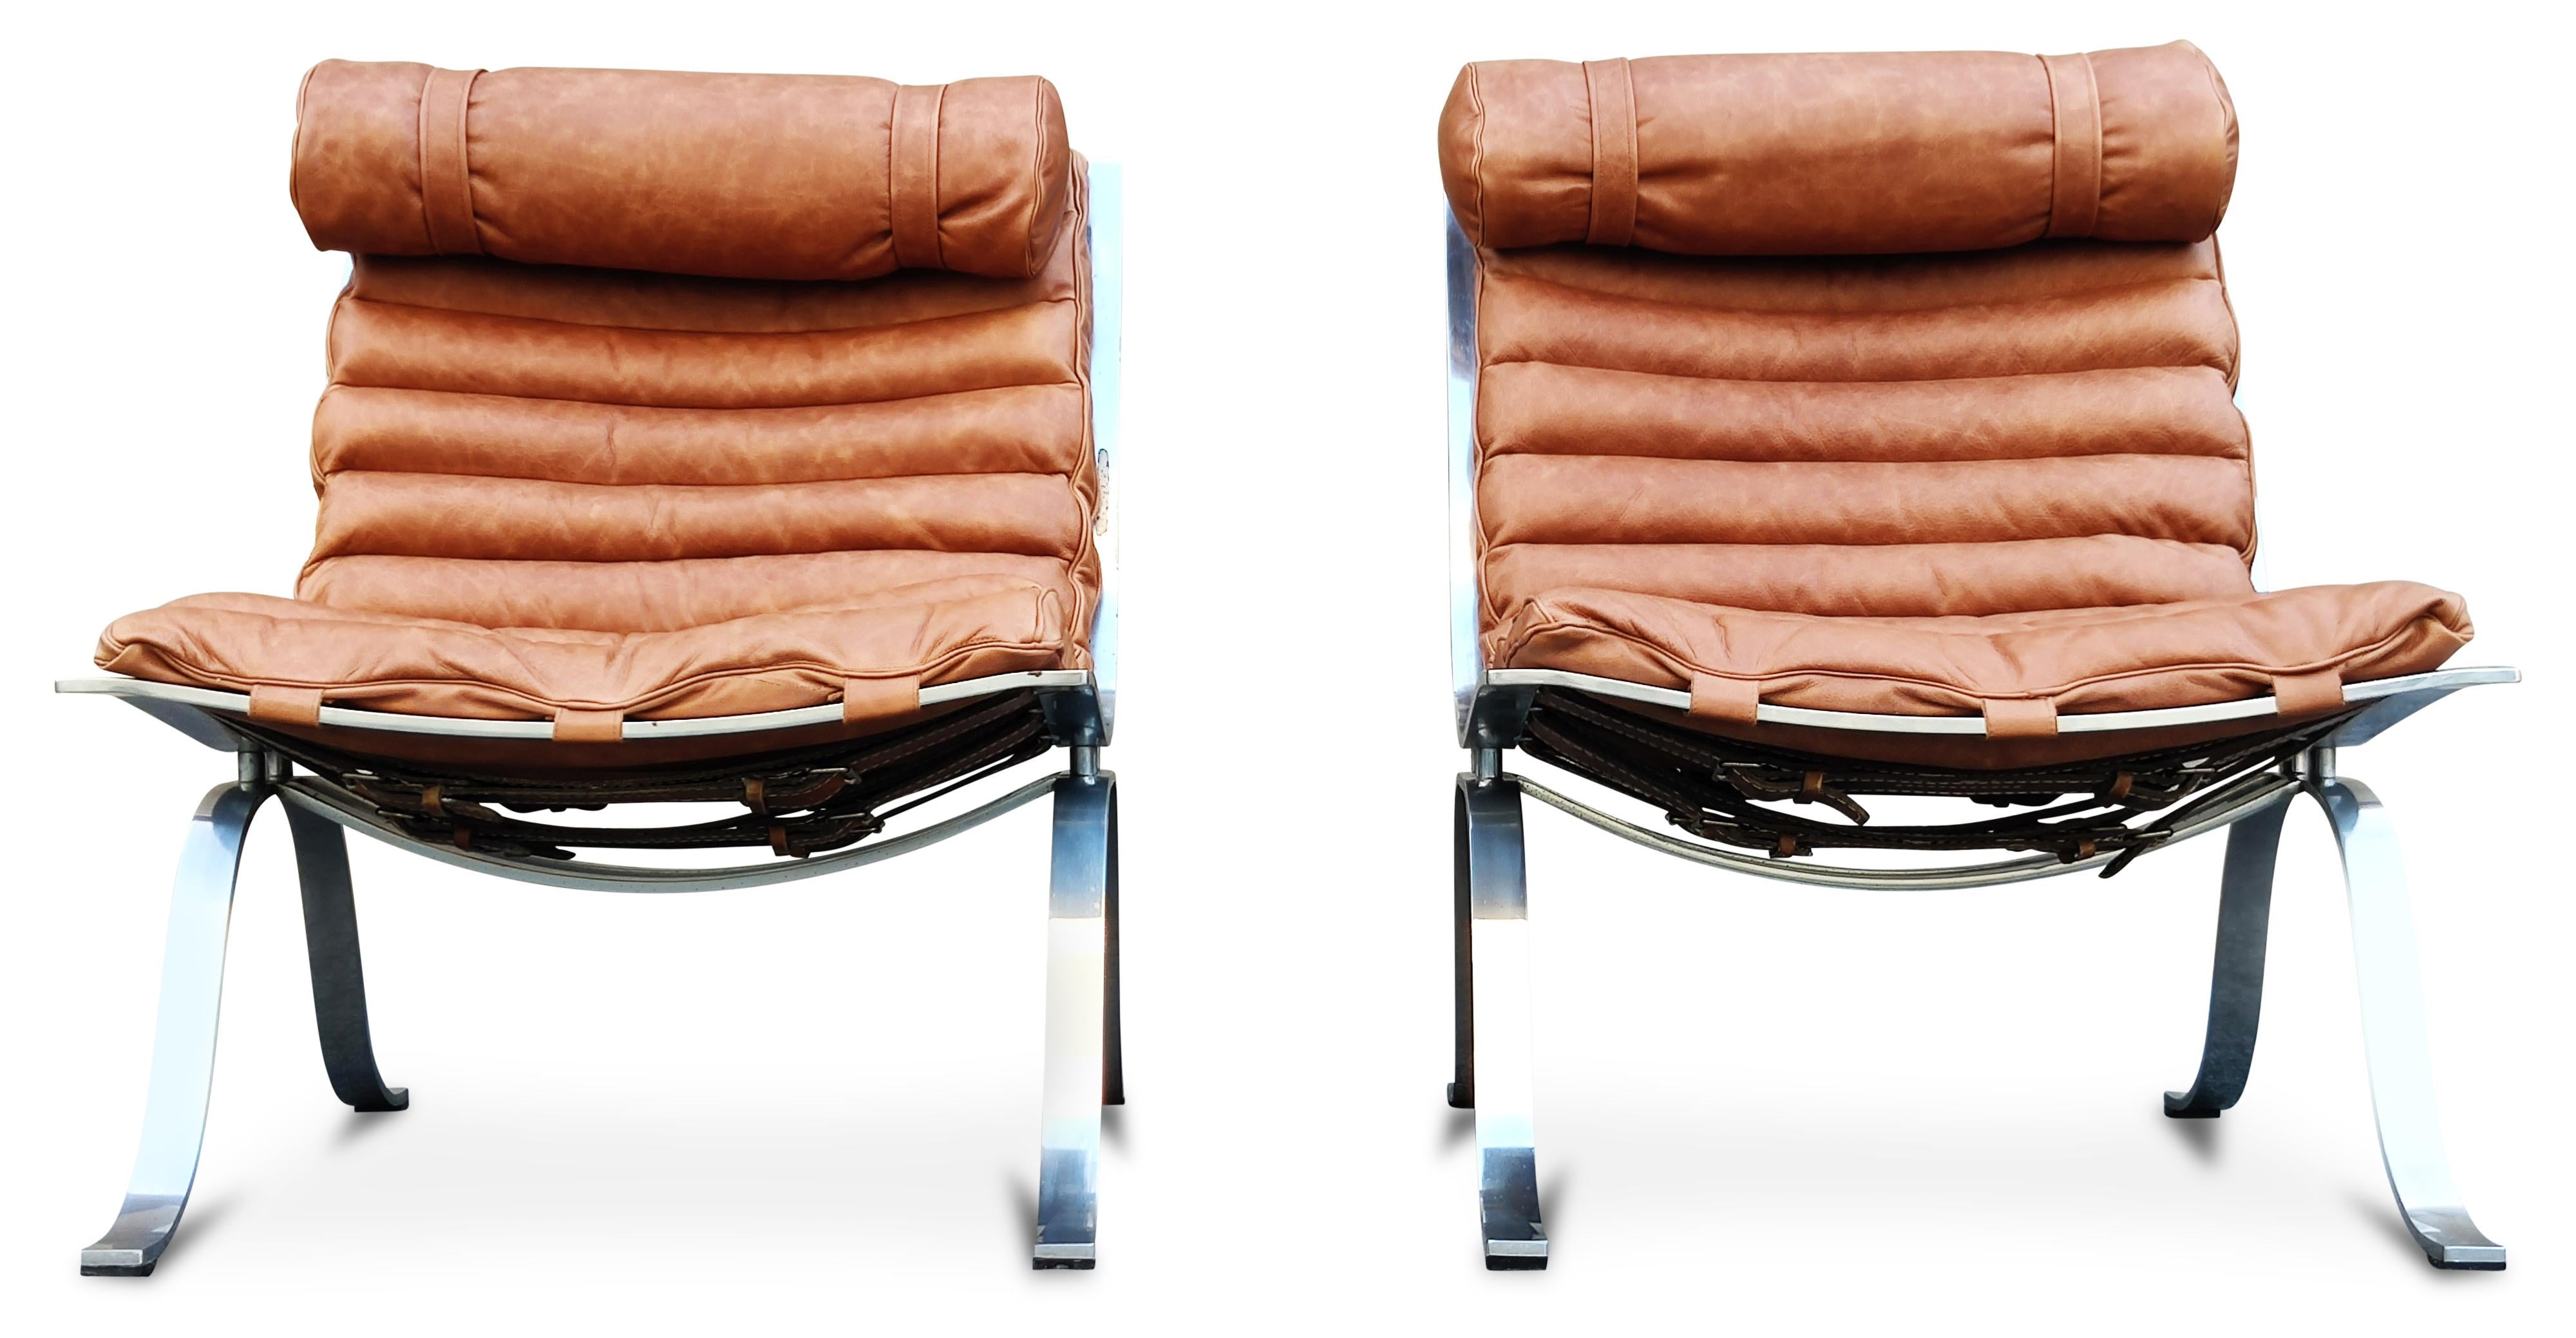 This beautiful pair of lounge chairs were designed in the 1960s by Arne Norell for Norell Moebel. The frames are made of two curves of chrome-plated steel, and the single cushions have been newly reupholstered in channel-stitched, cognac-colored